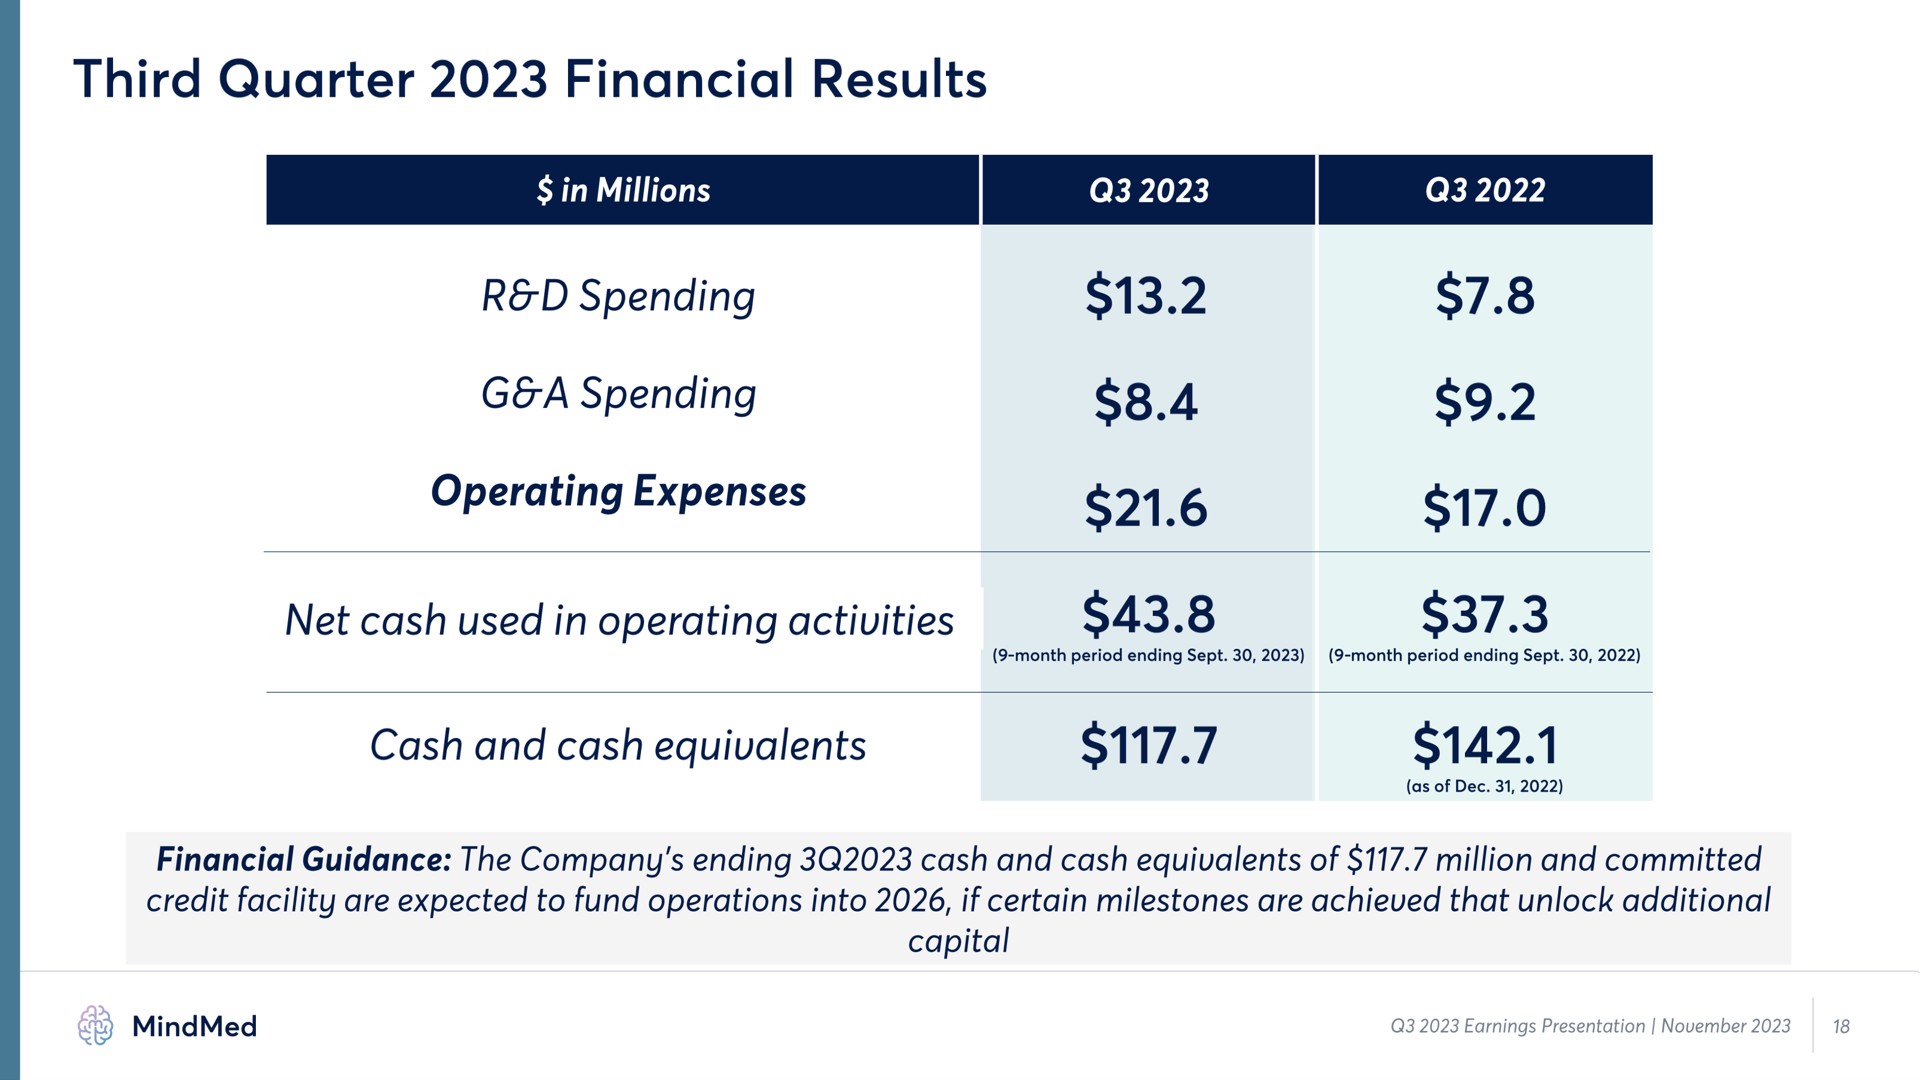 third quarter financial results spending a spending operating expenses net cash used in operating activities cash and cash equivalents | MindMed